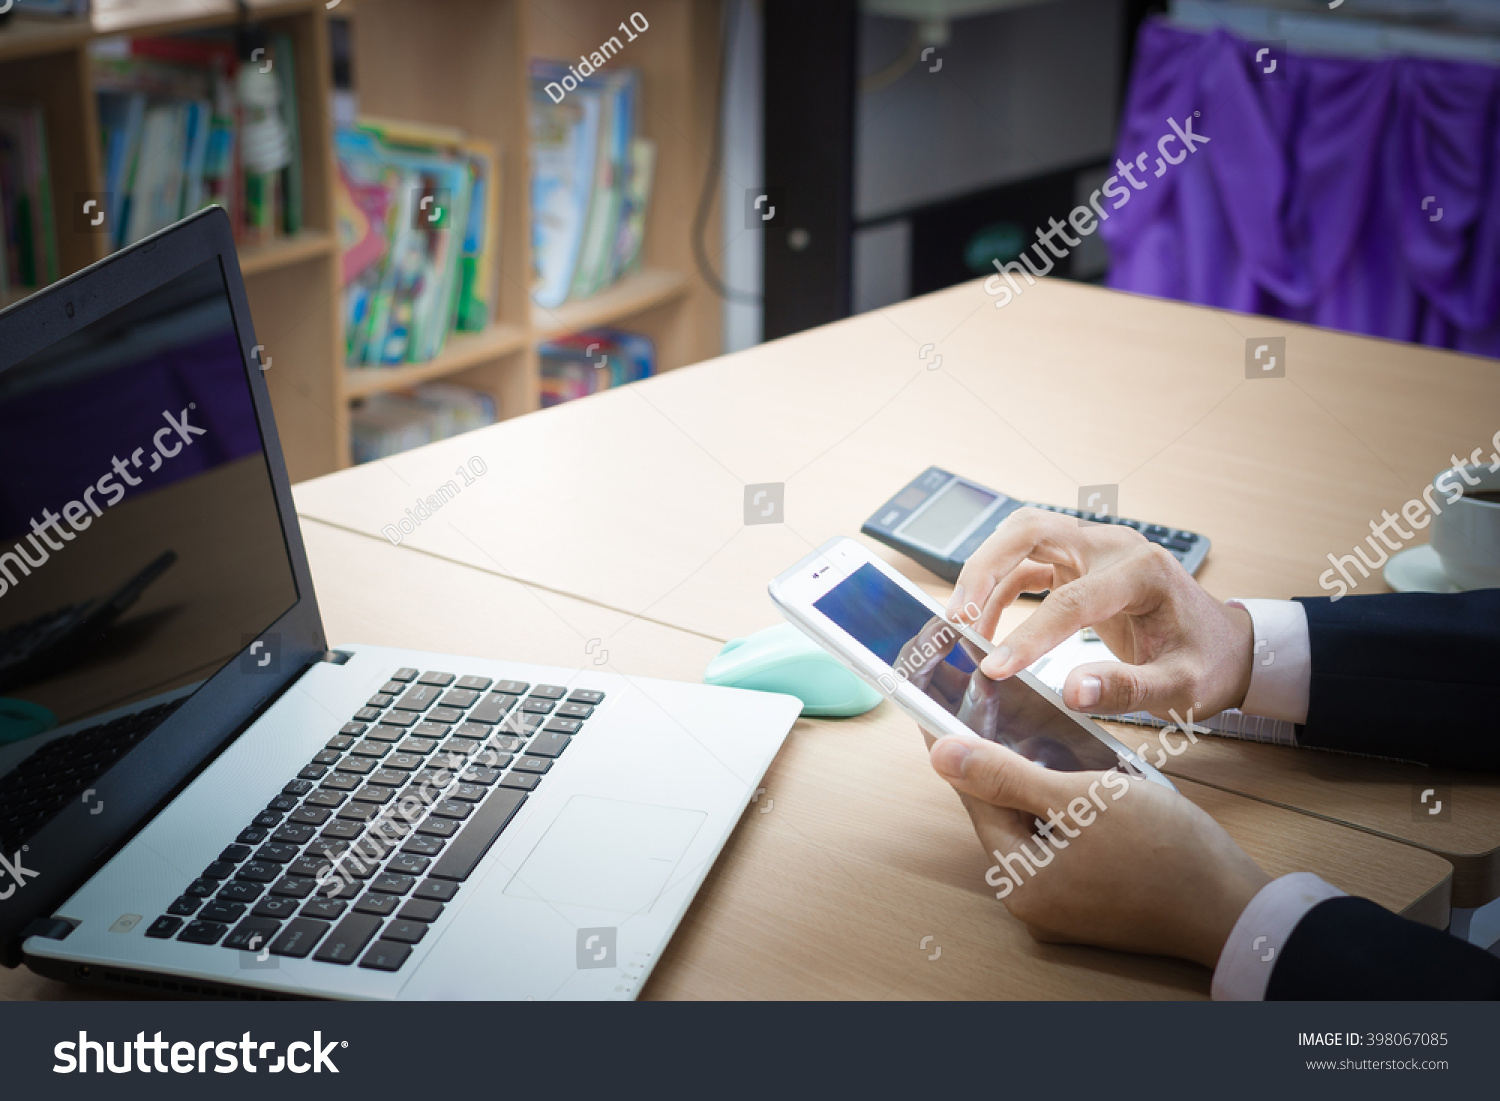 designer hand working with digital tablet and laptop and notebook on wooden desk in office
 #398067085